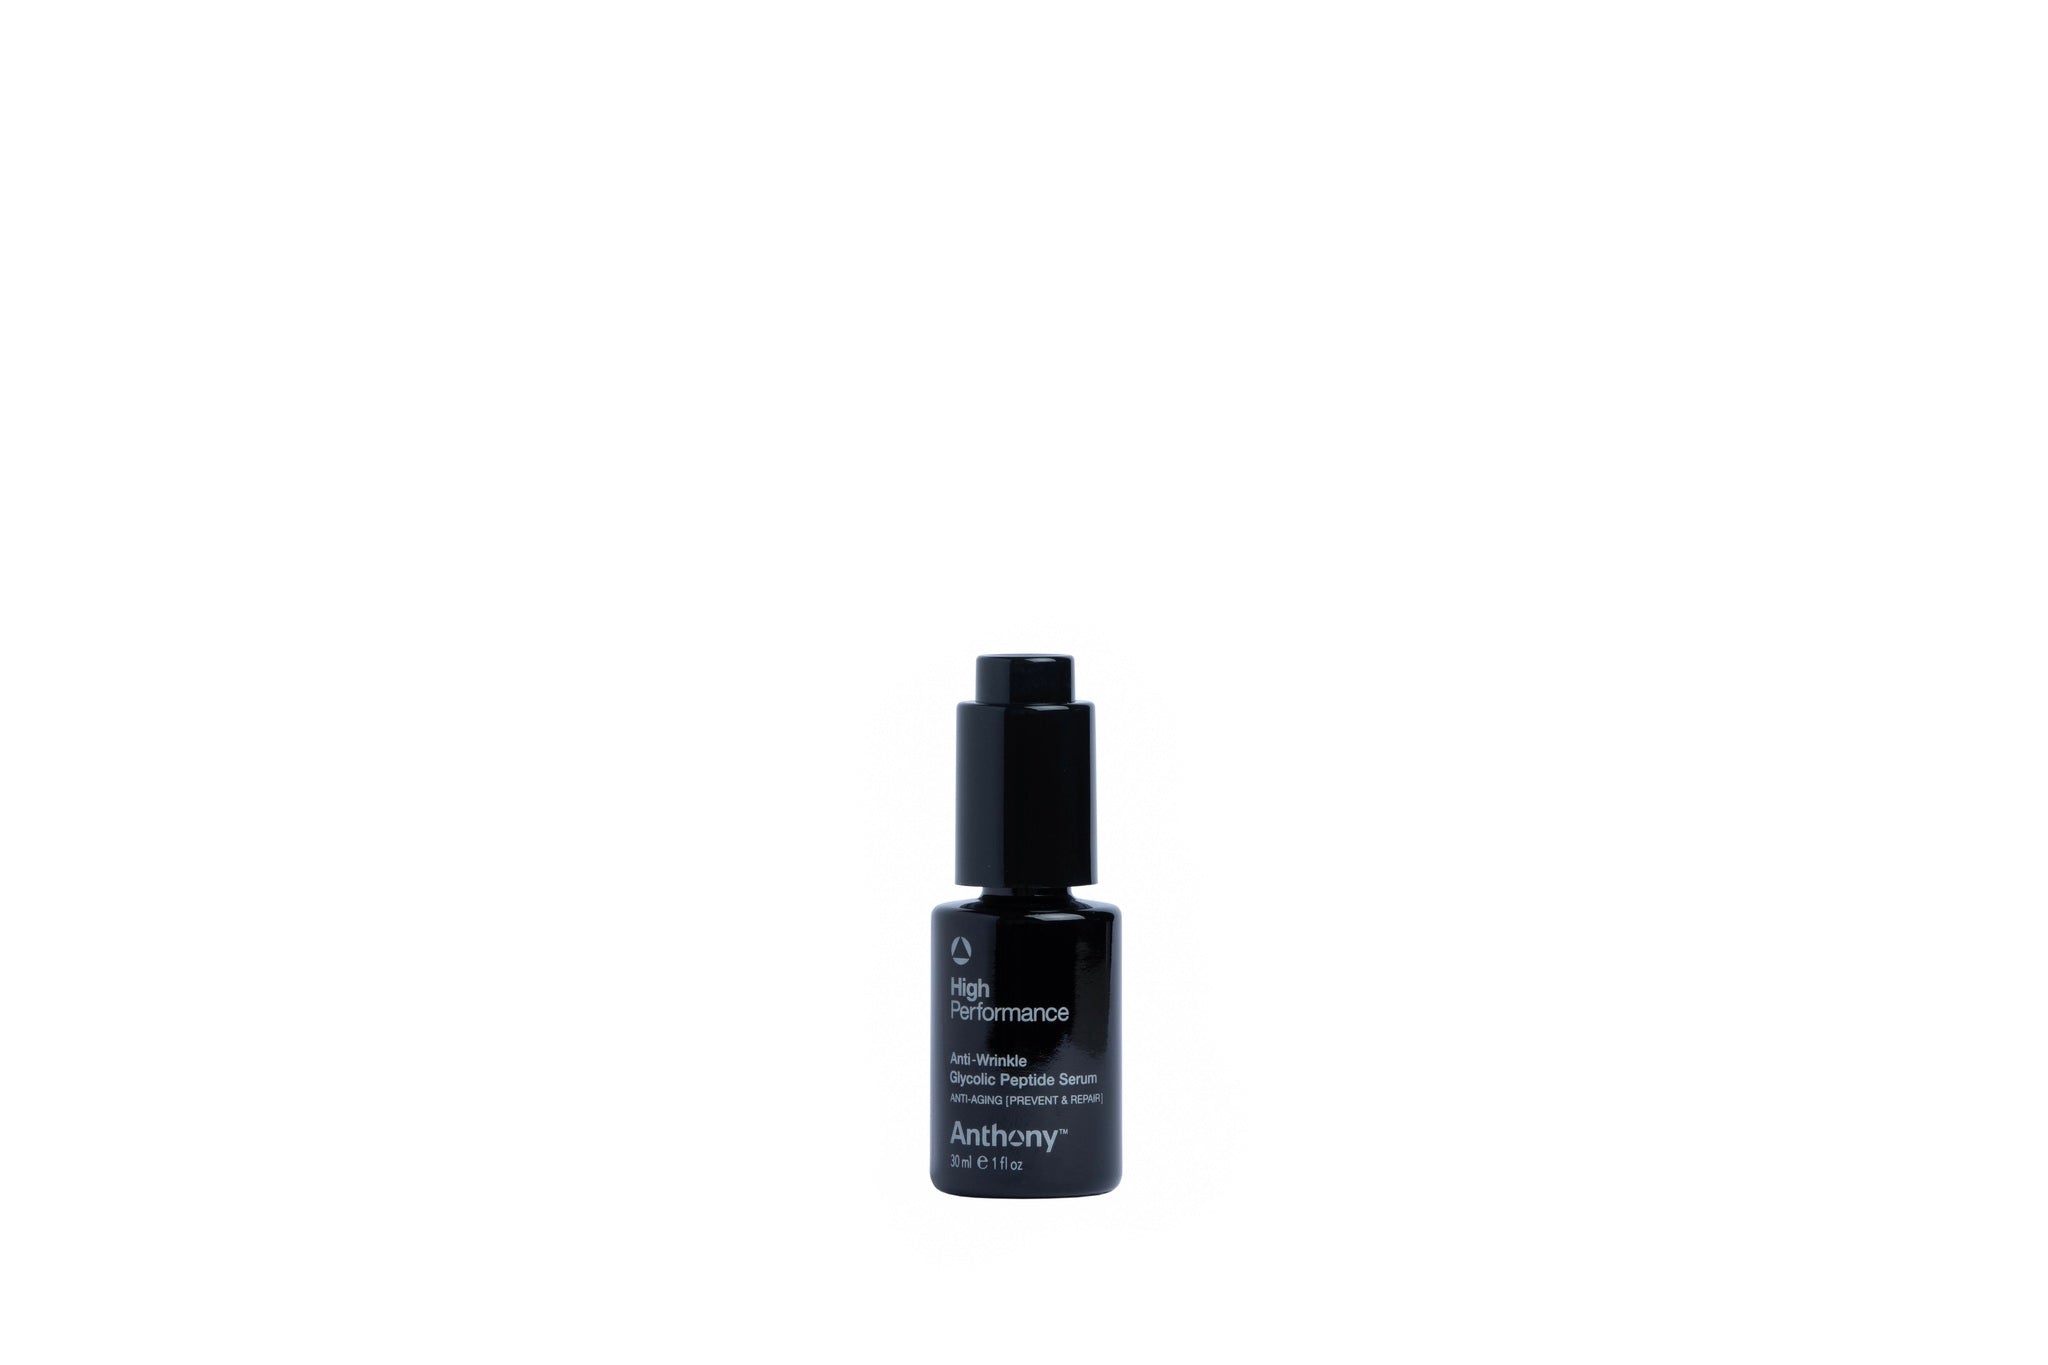 Anti-Wrinkle Glycolic Peptide Serum  Powerful Anti-aging and Lifting -  Anthony Skincare For Men